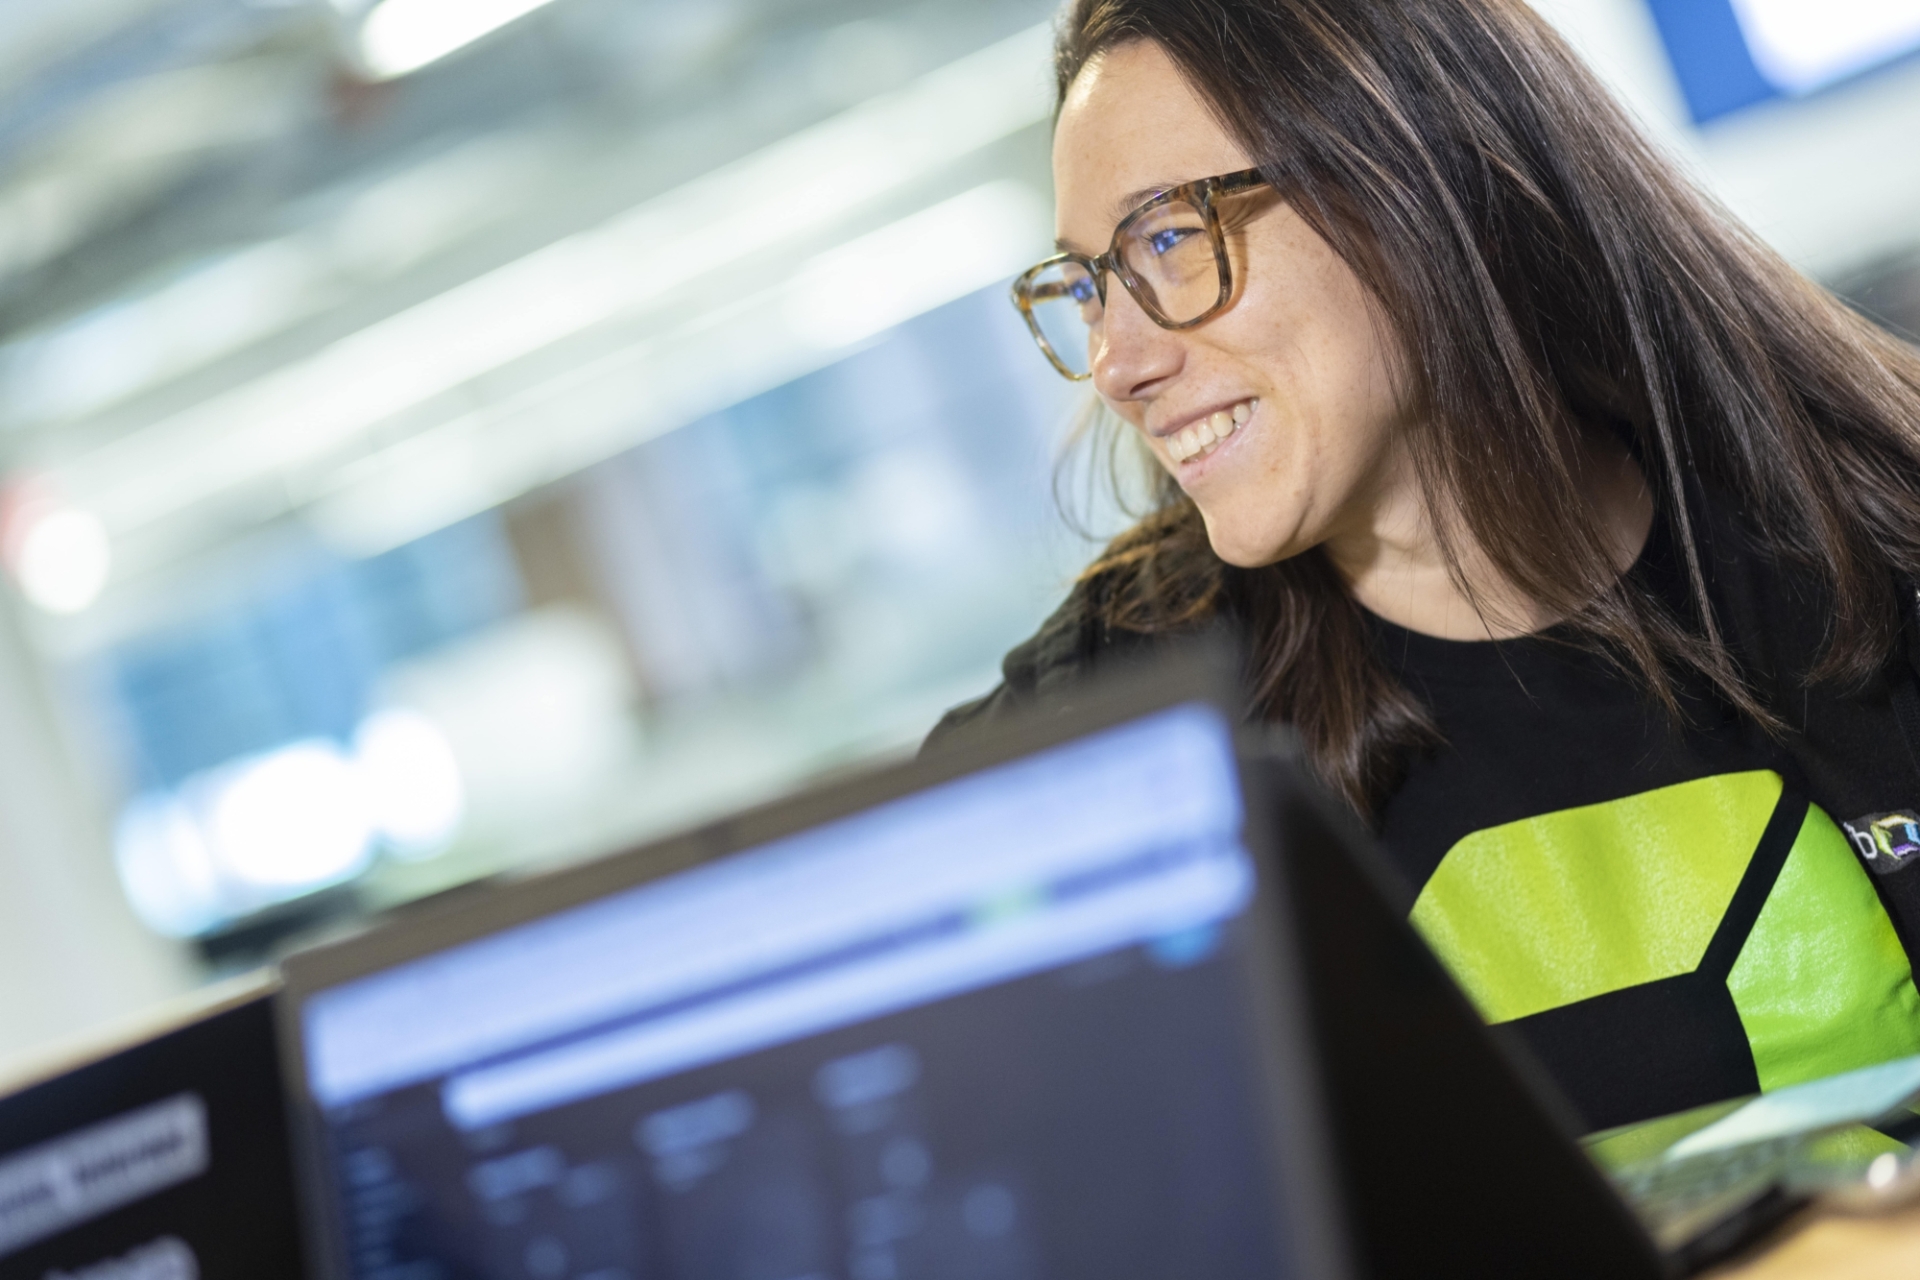 Dynatrace employee smiling at her colleague